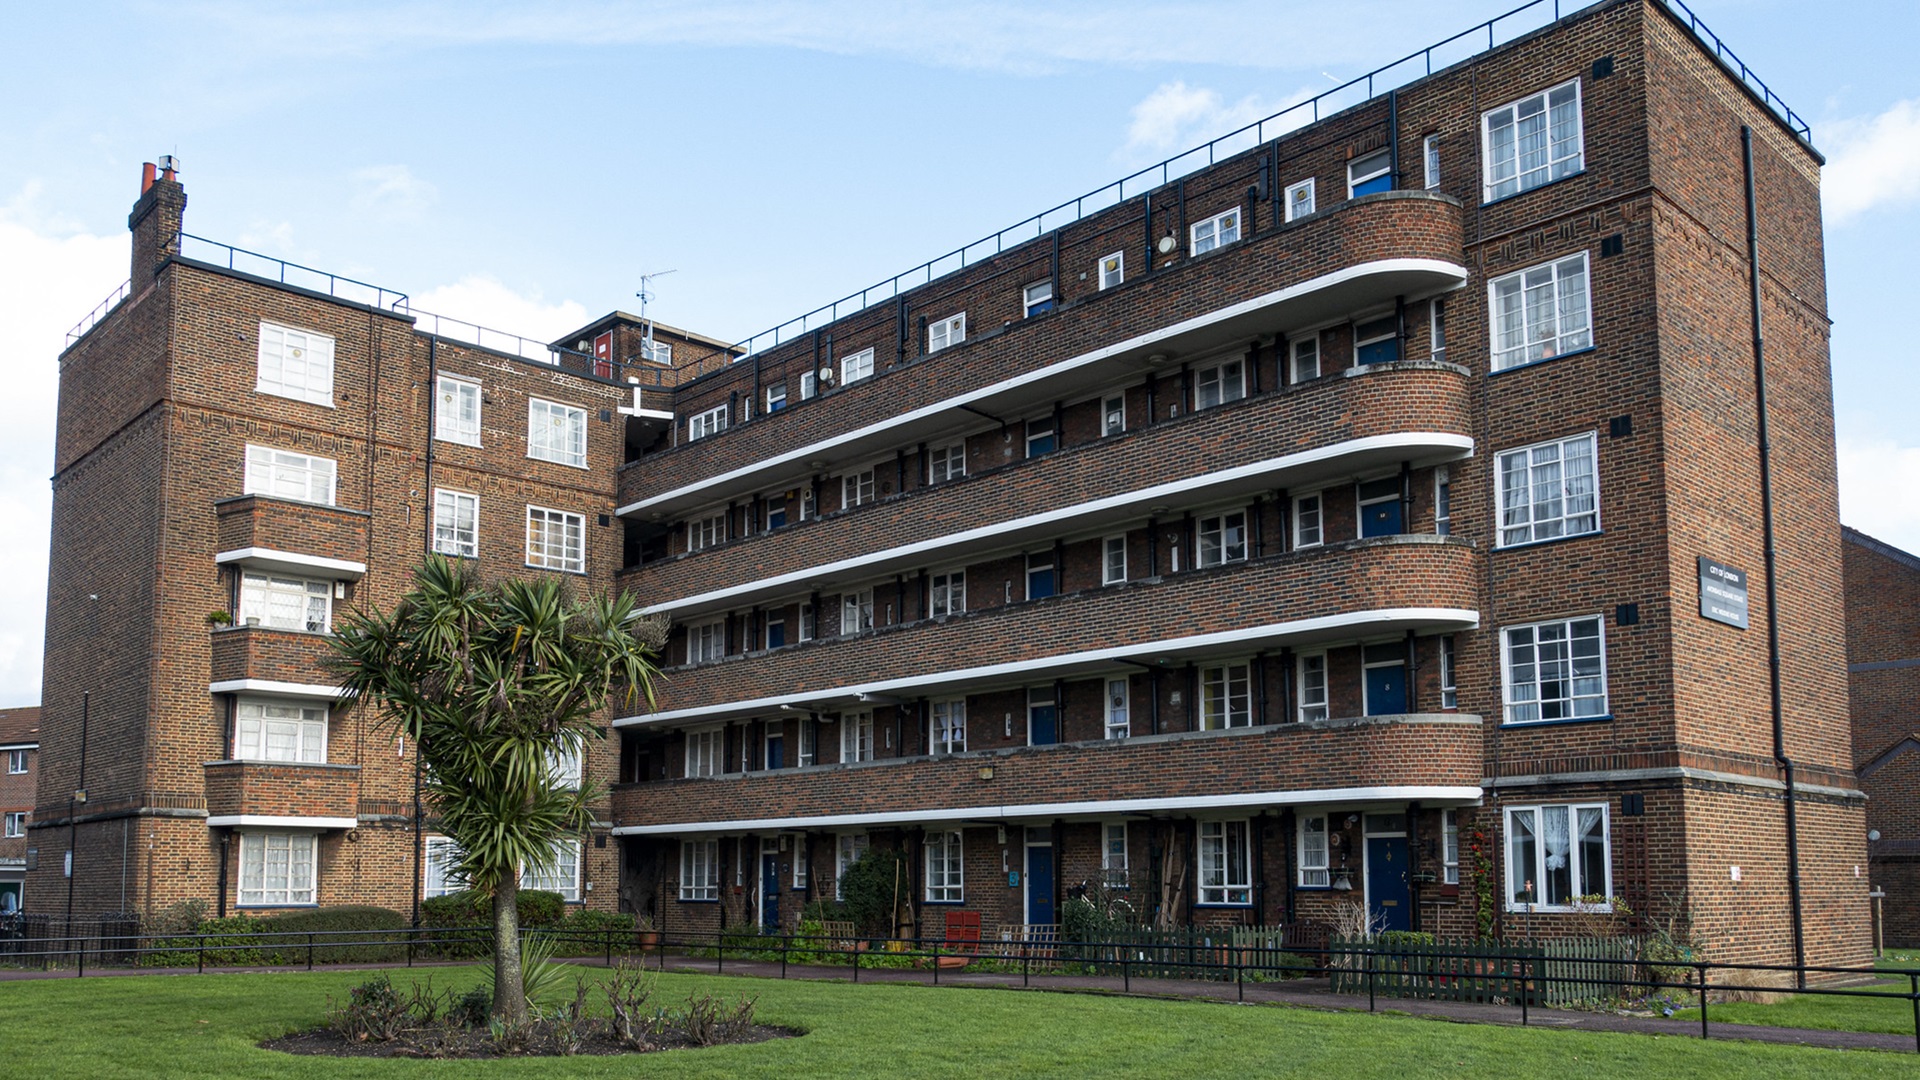 council homes sold off under Right to Buy